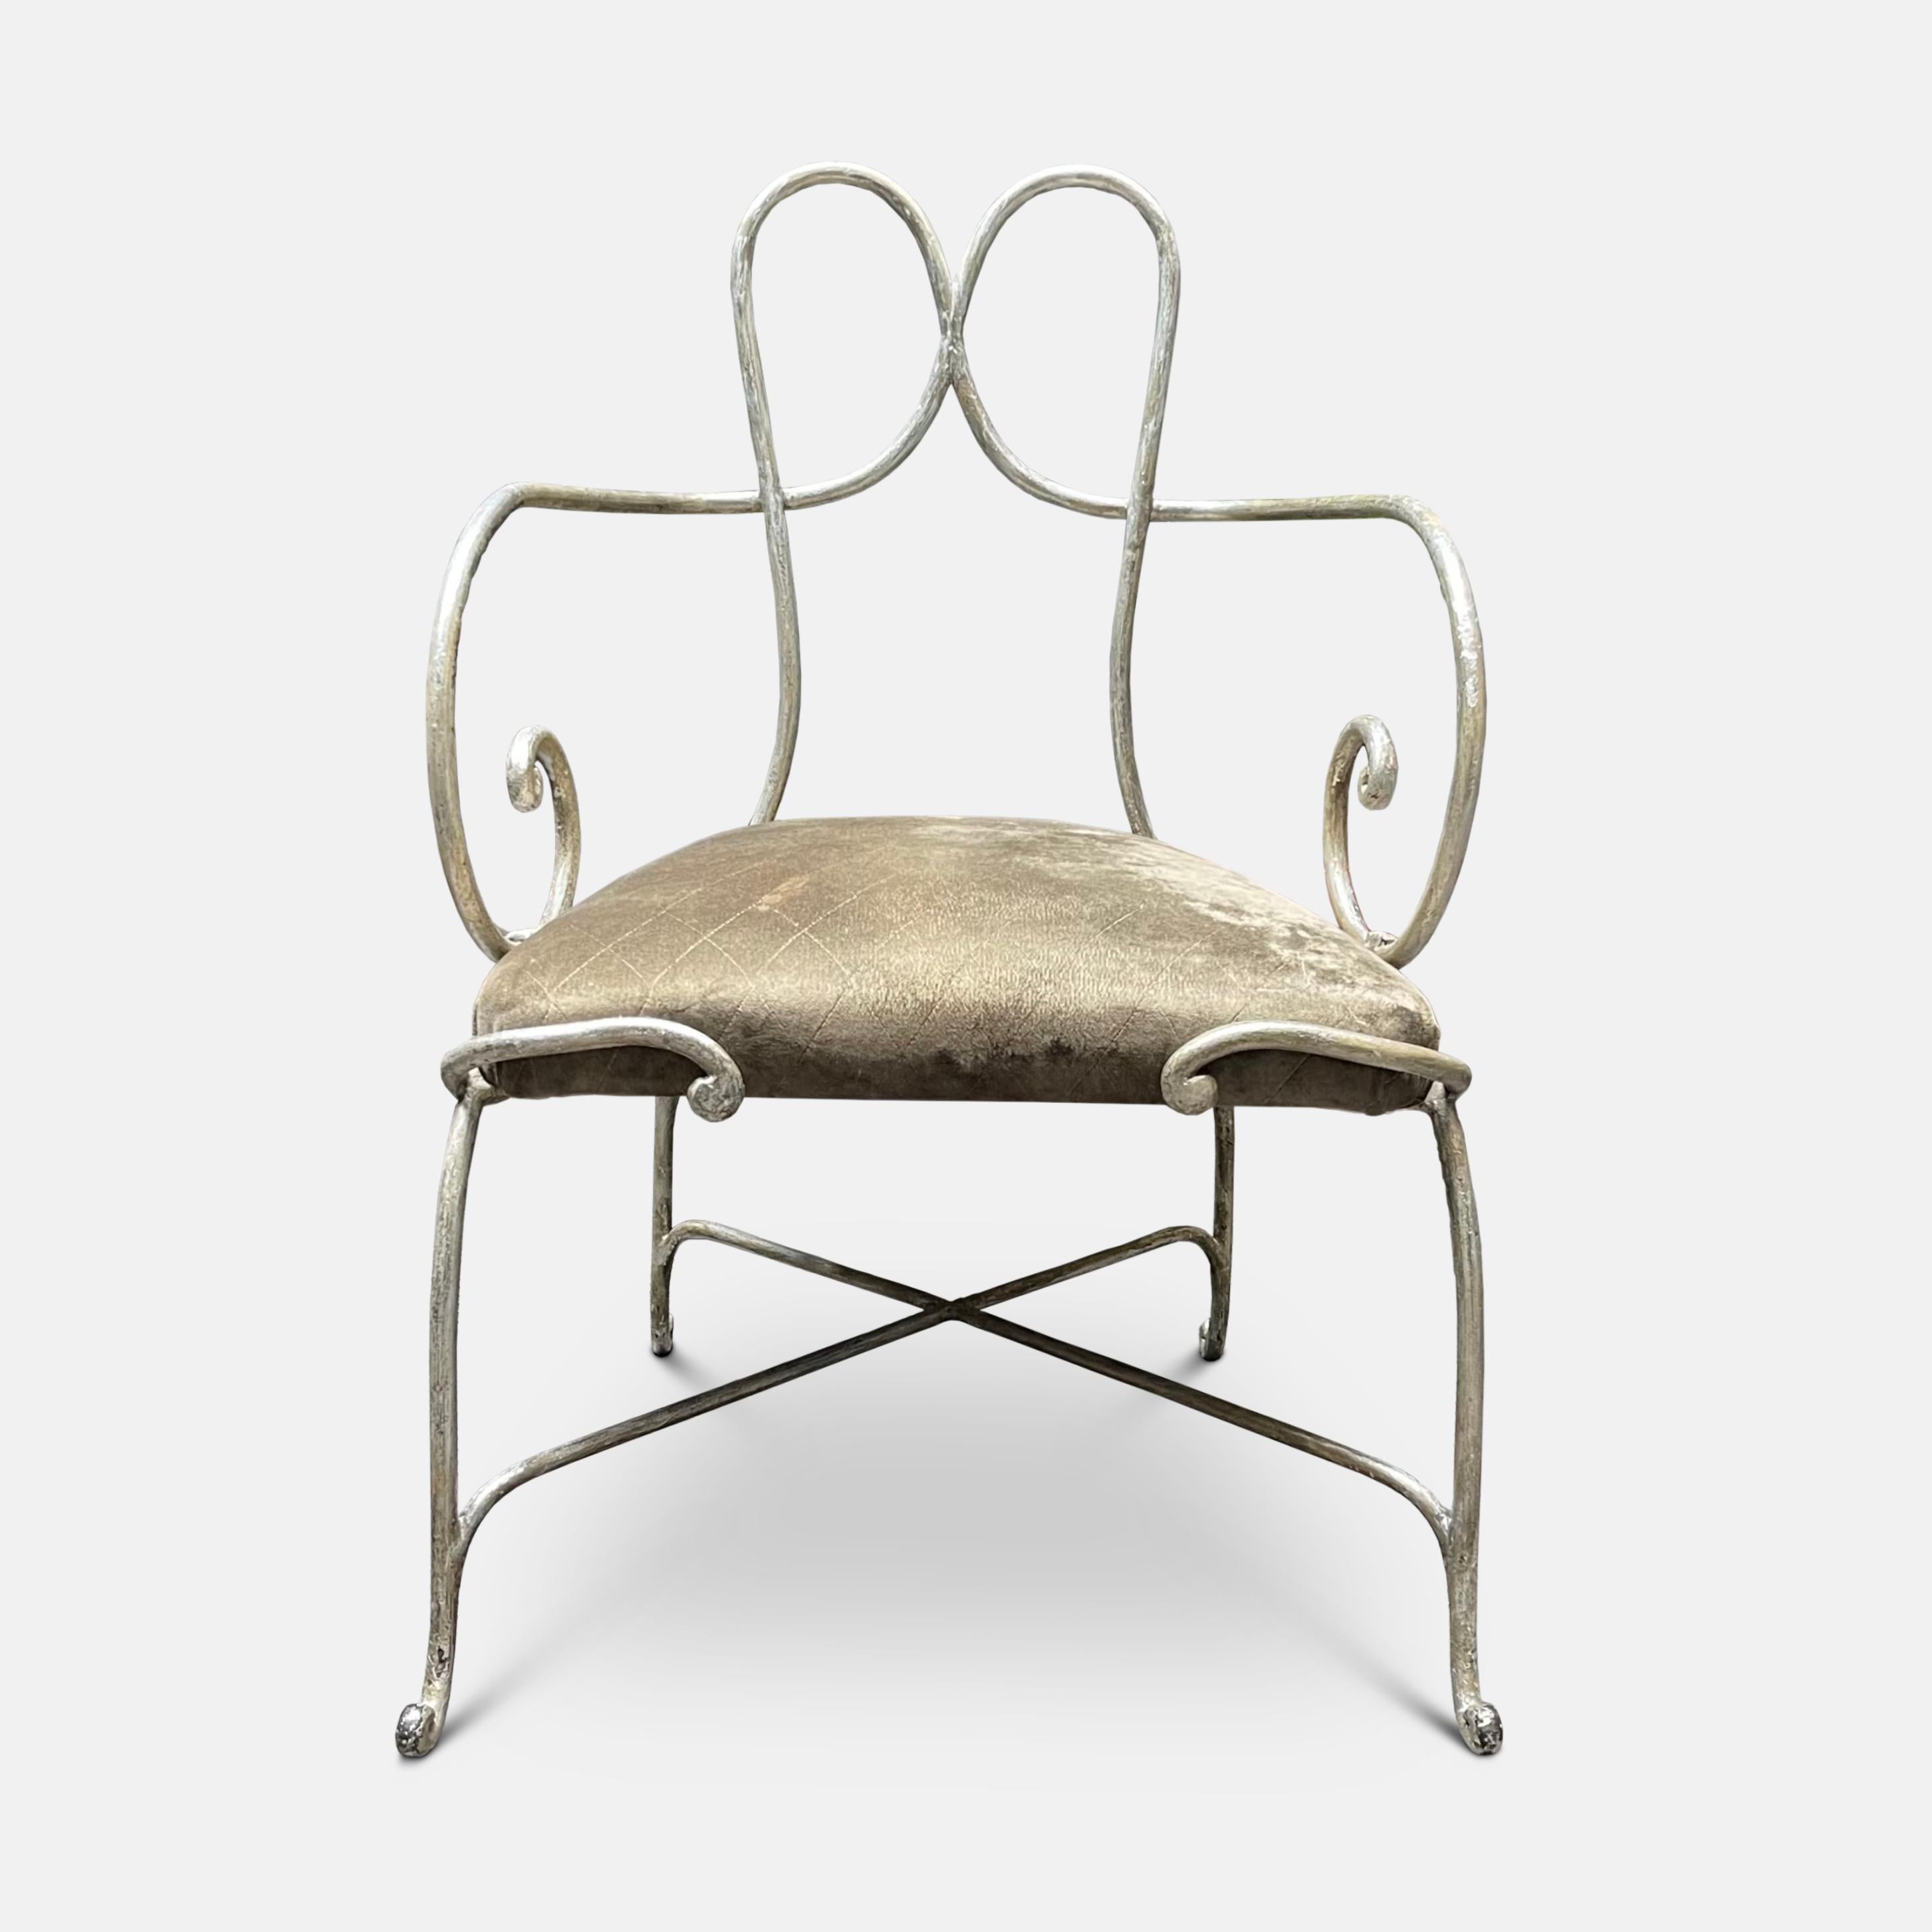 A  1940’s forged metal armchair by  René Drouet finished in patinated silver. 

Provenance: Collection Claude Montana Literature: Architectural Digest, septembre 1989. Claude Montana An Avant-Garde Elegance on the Left Bank. Pages 120 -